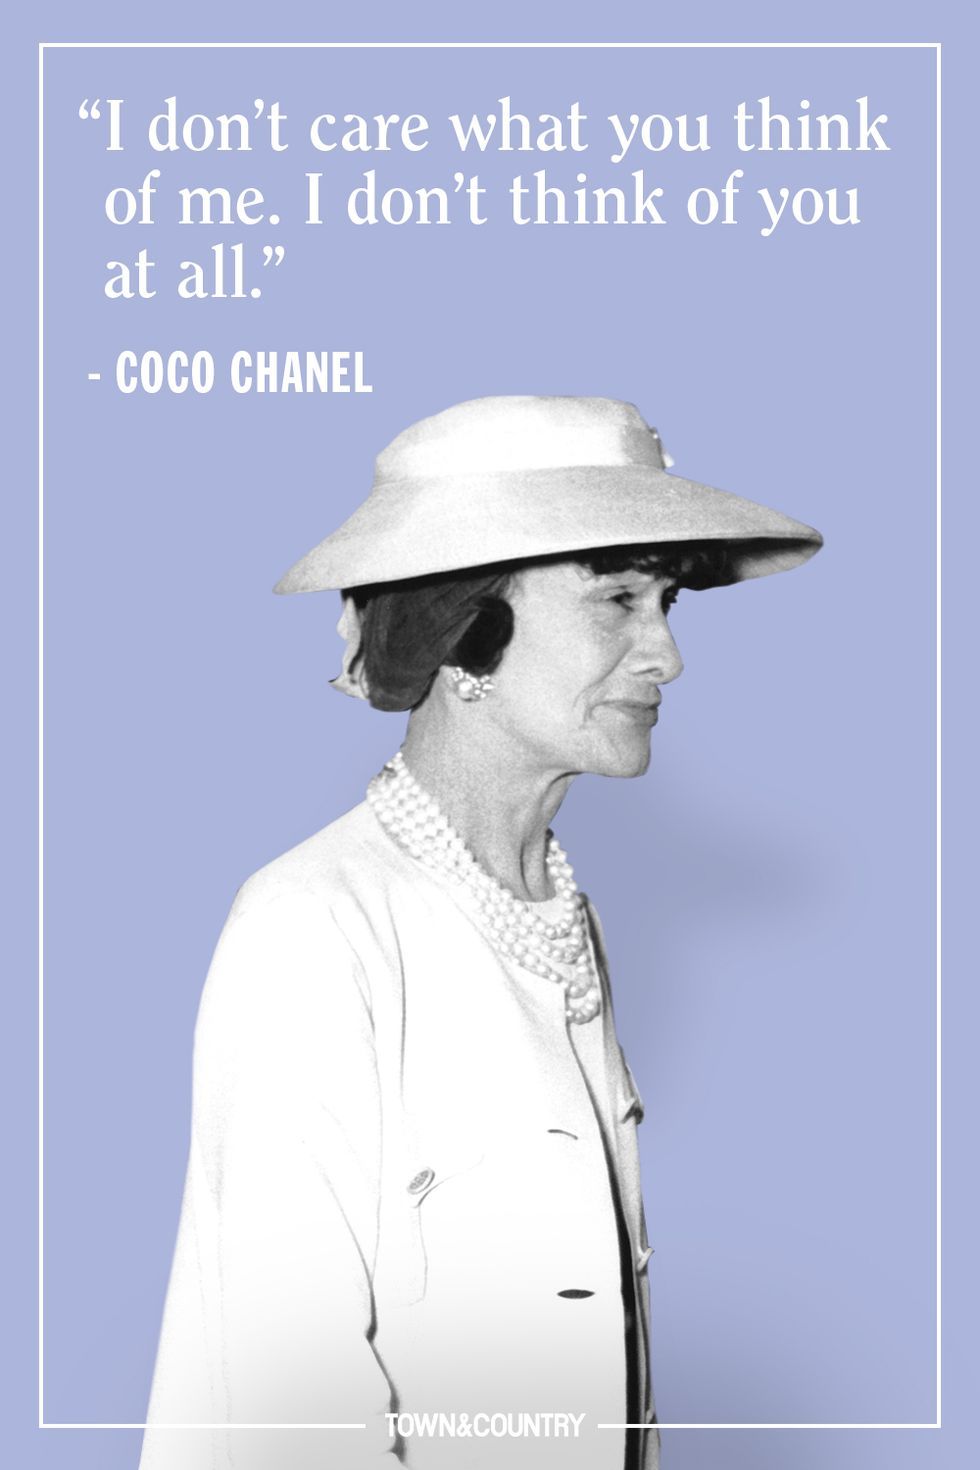 101 Coco Chanel Quotes About Beauty, Fashion, Women and Love